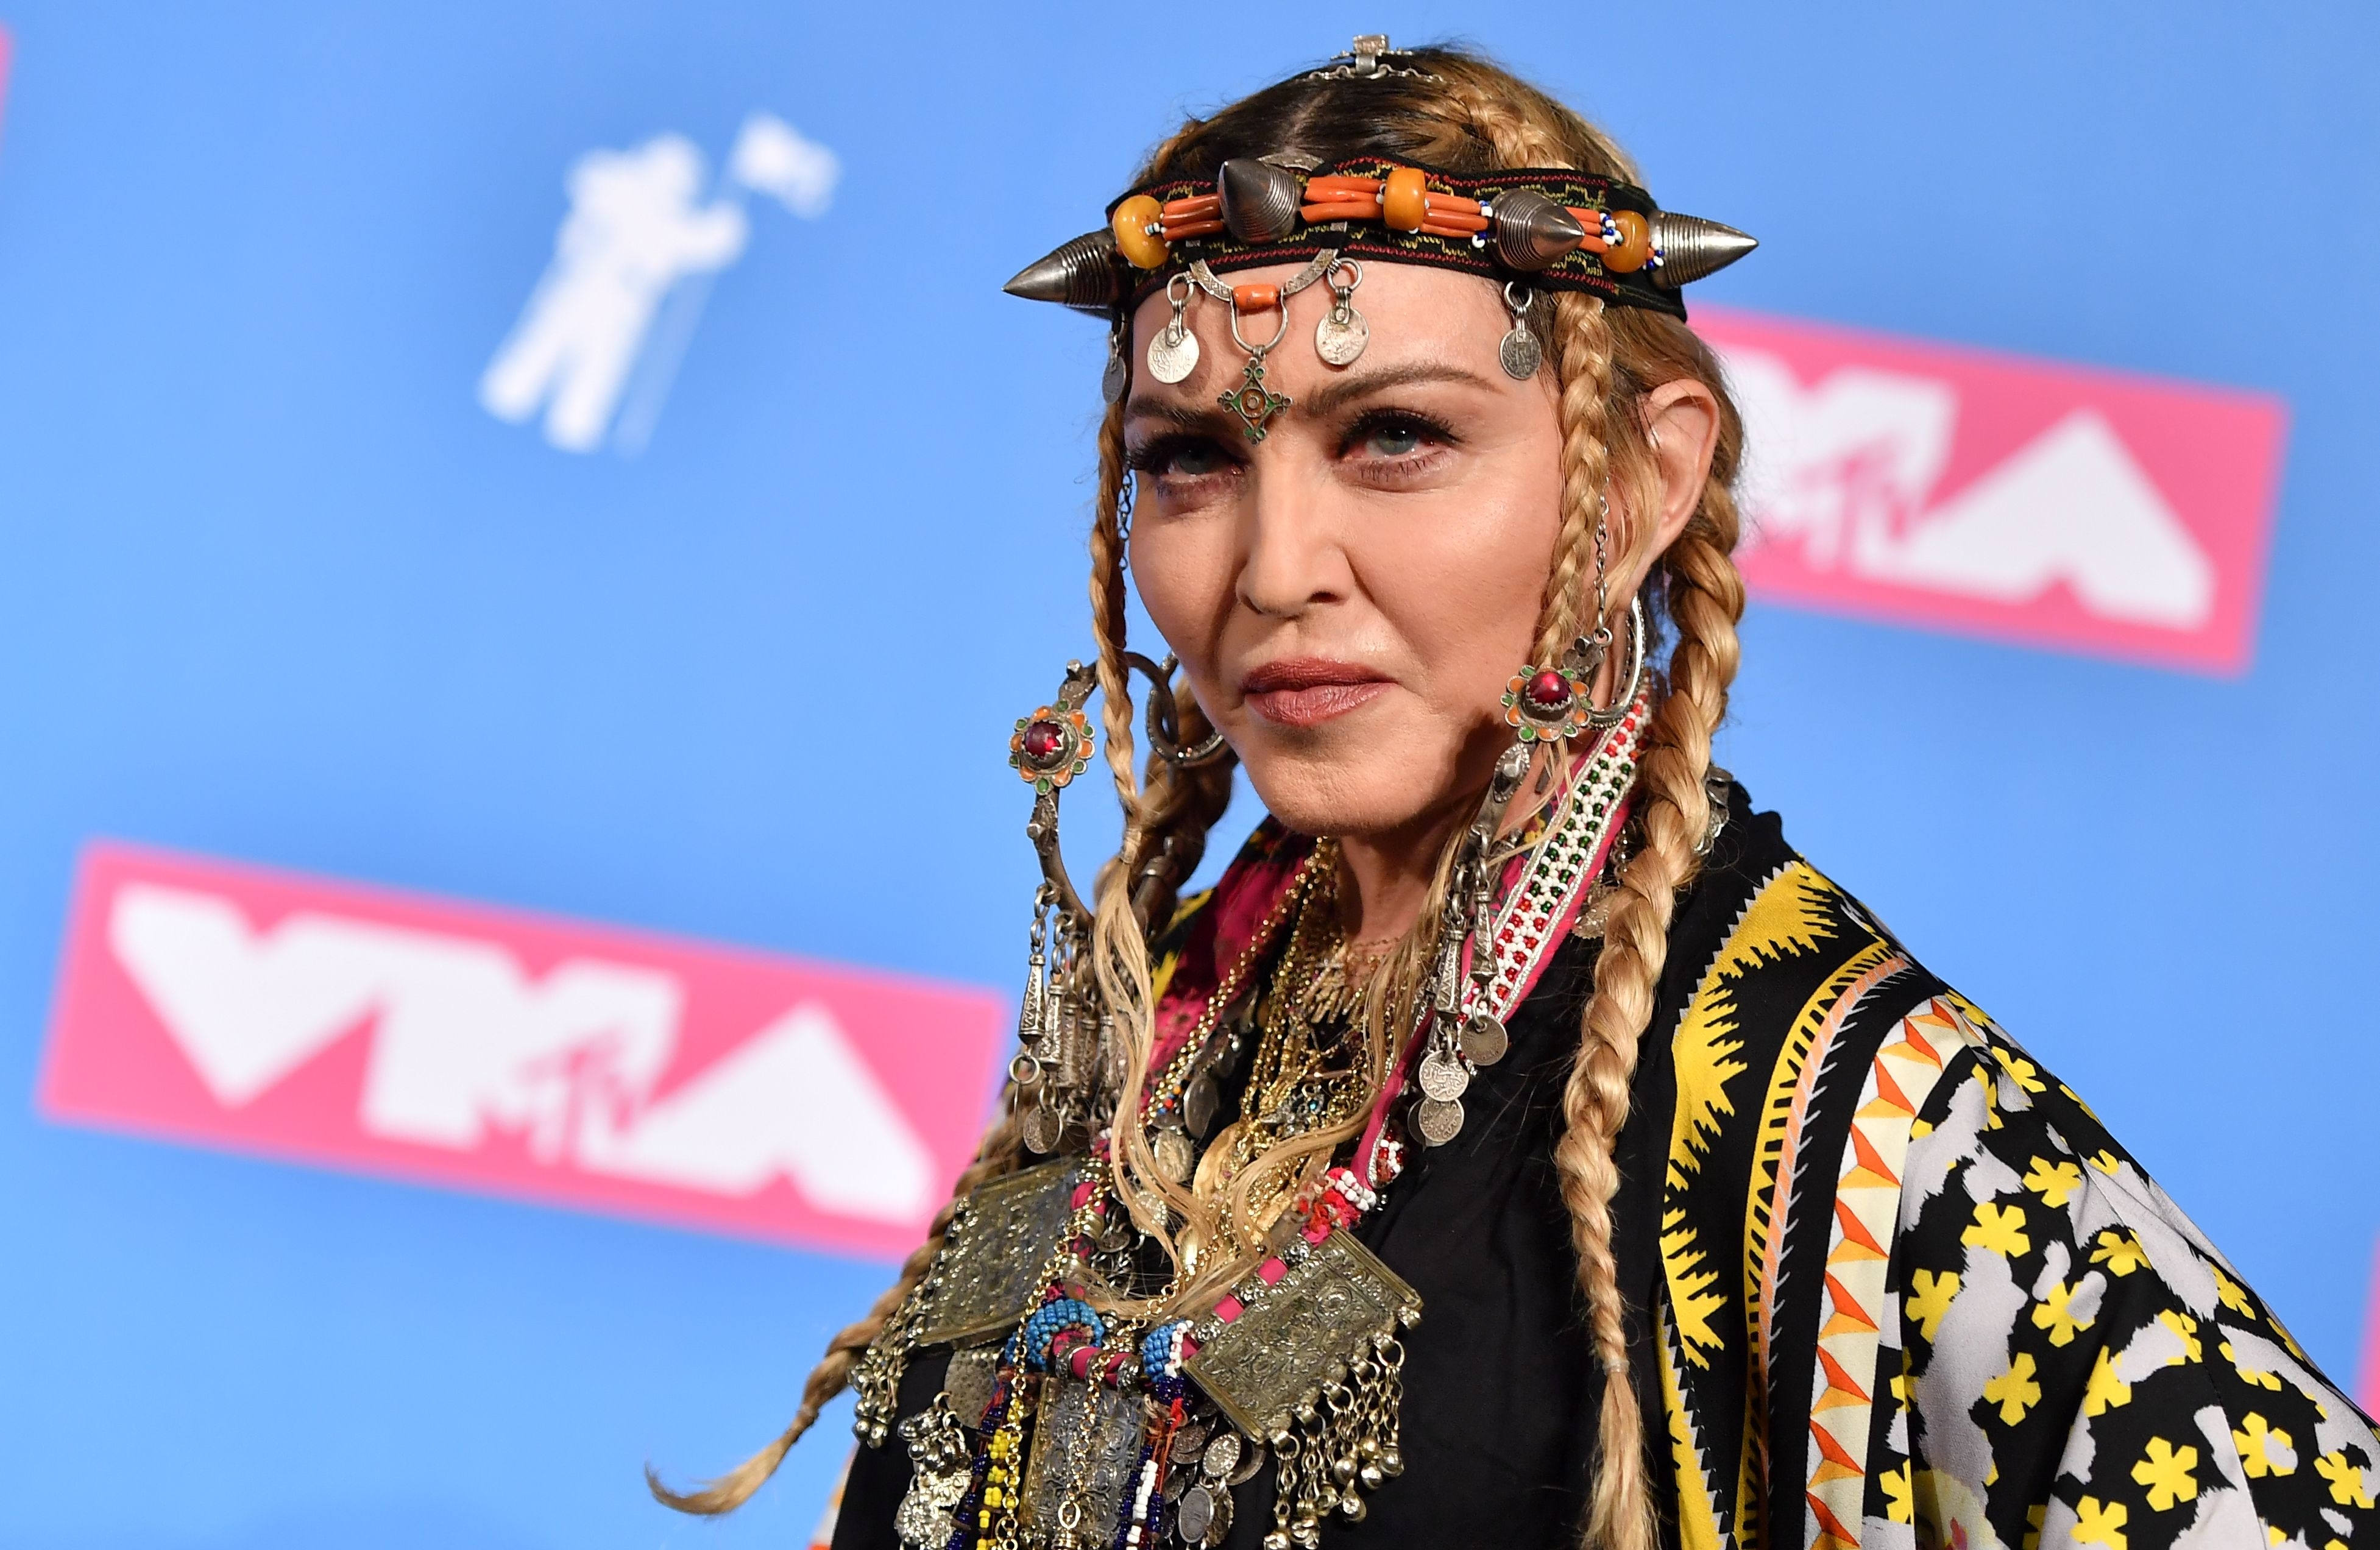 Close-up of Madonna in a colorful outfit and head gear at the VMAs